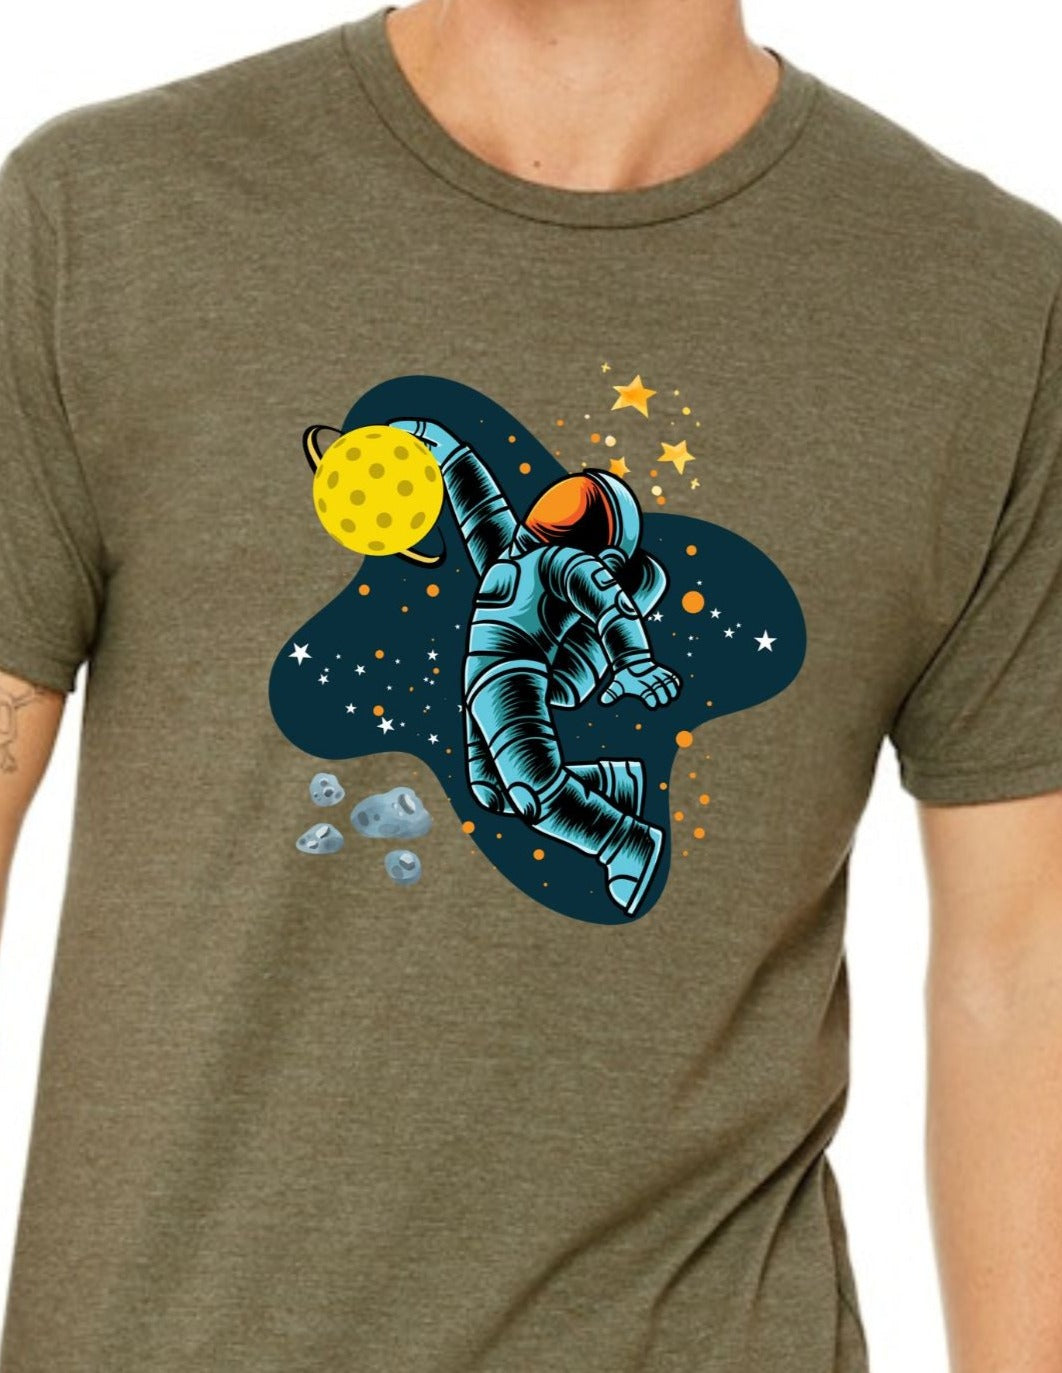 A one of a kind, our Pickleball Space Astronaut Unisex Premium T-Shirt!